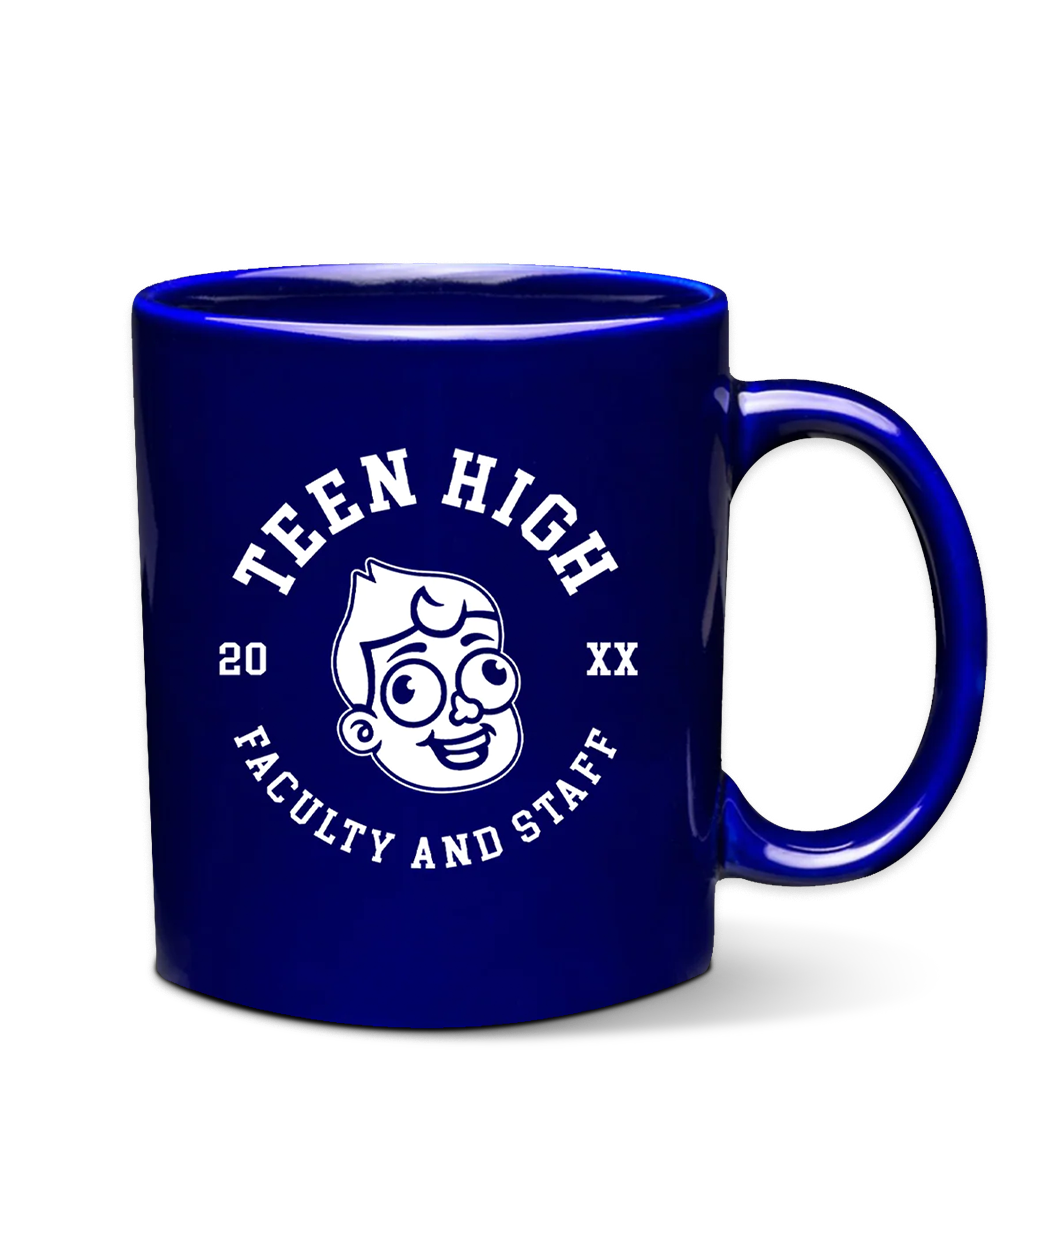 Dark Blue 11 oz mug with white screenprinted logo that says TEEN HIGH FACULTY AND STAFF with an illustrated head of a boy in the middle.